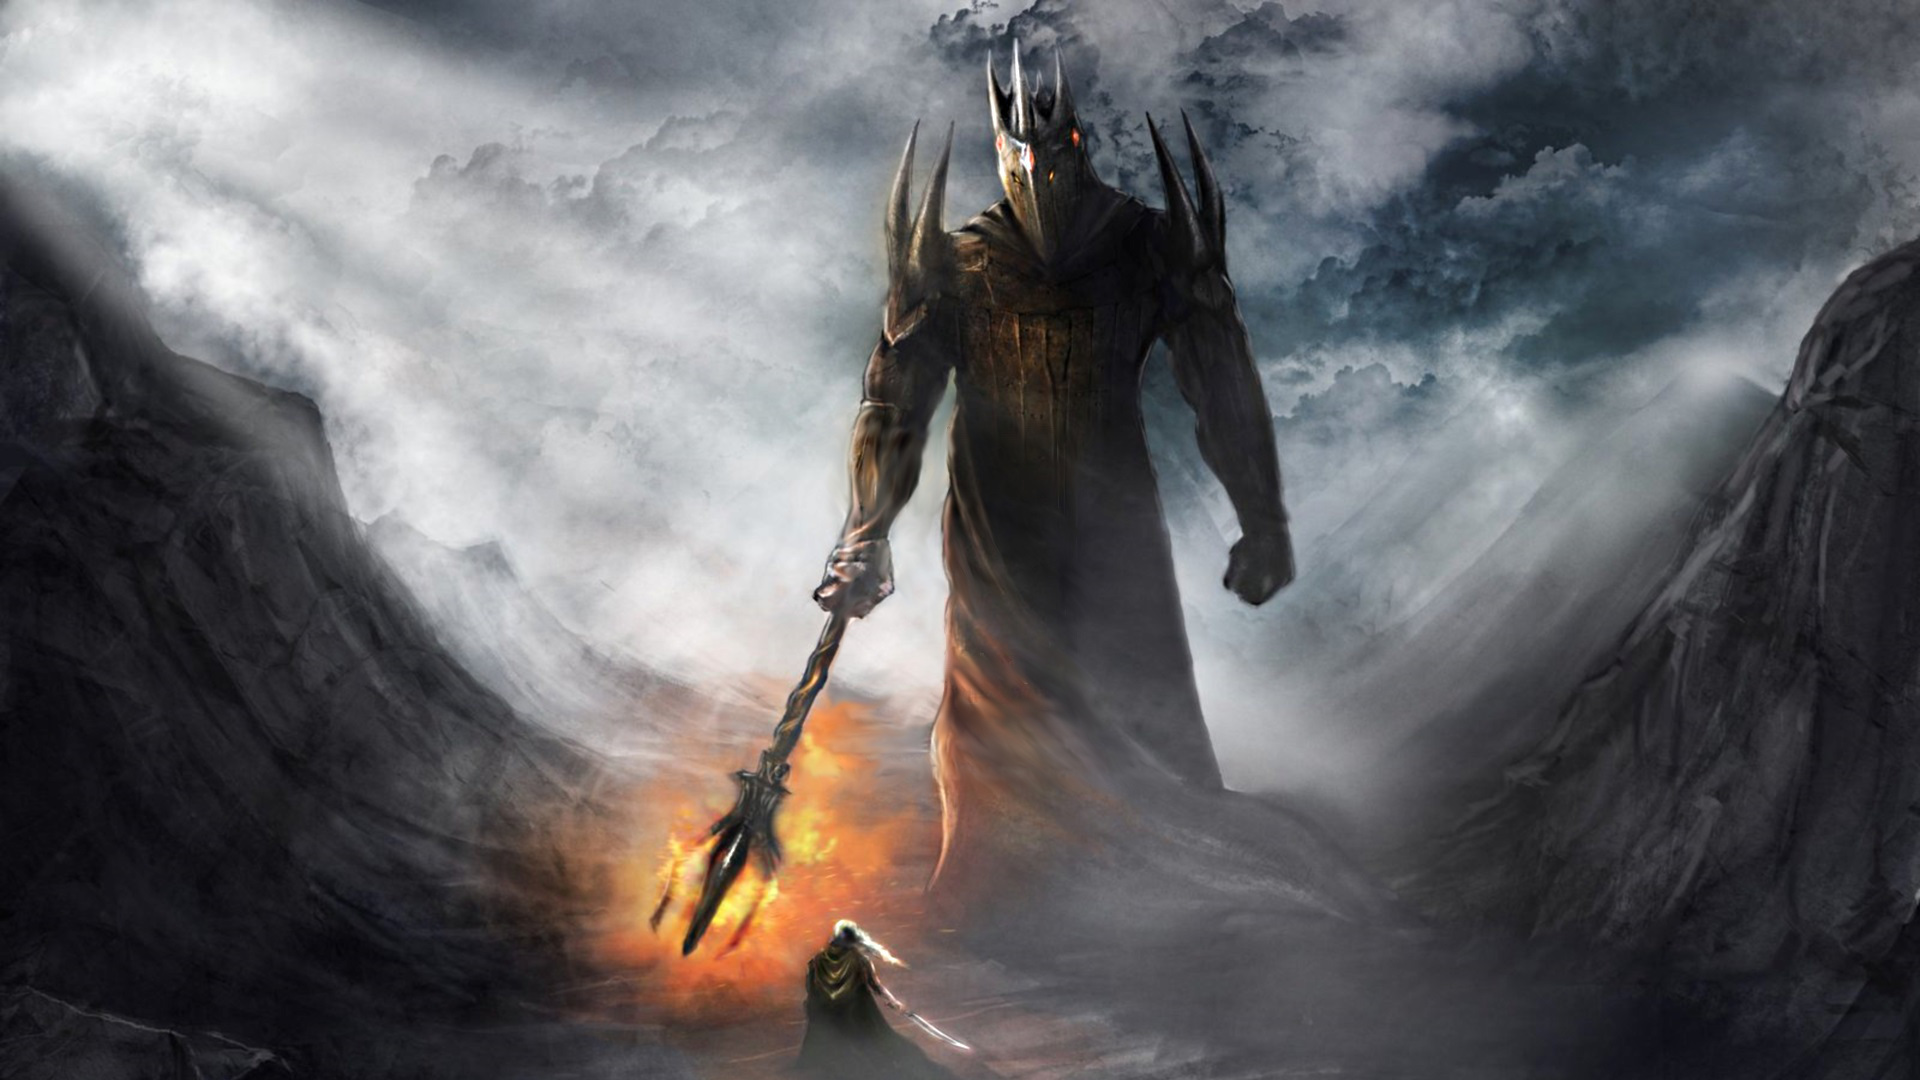 lord of the rings, morgoth (lord of the rings), fantasy, the lord of the rings